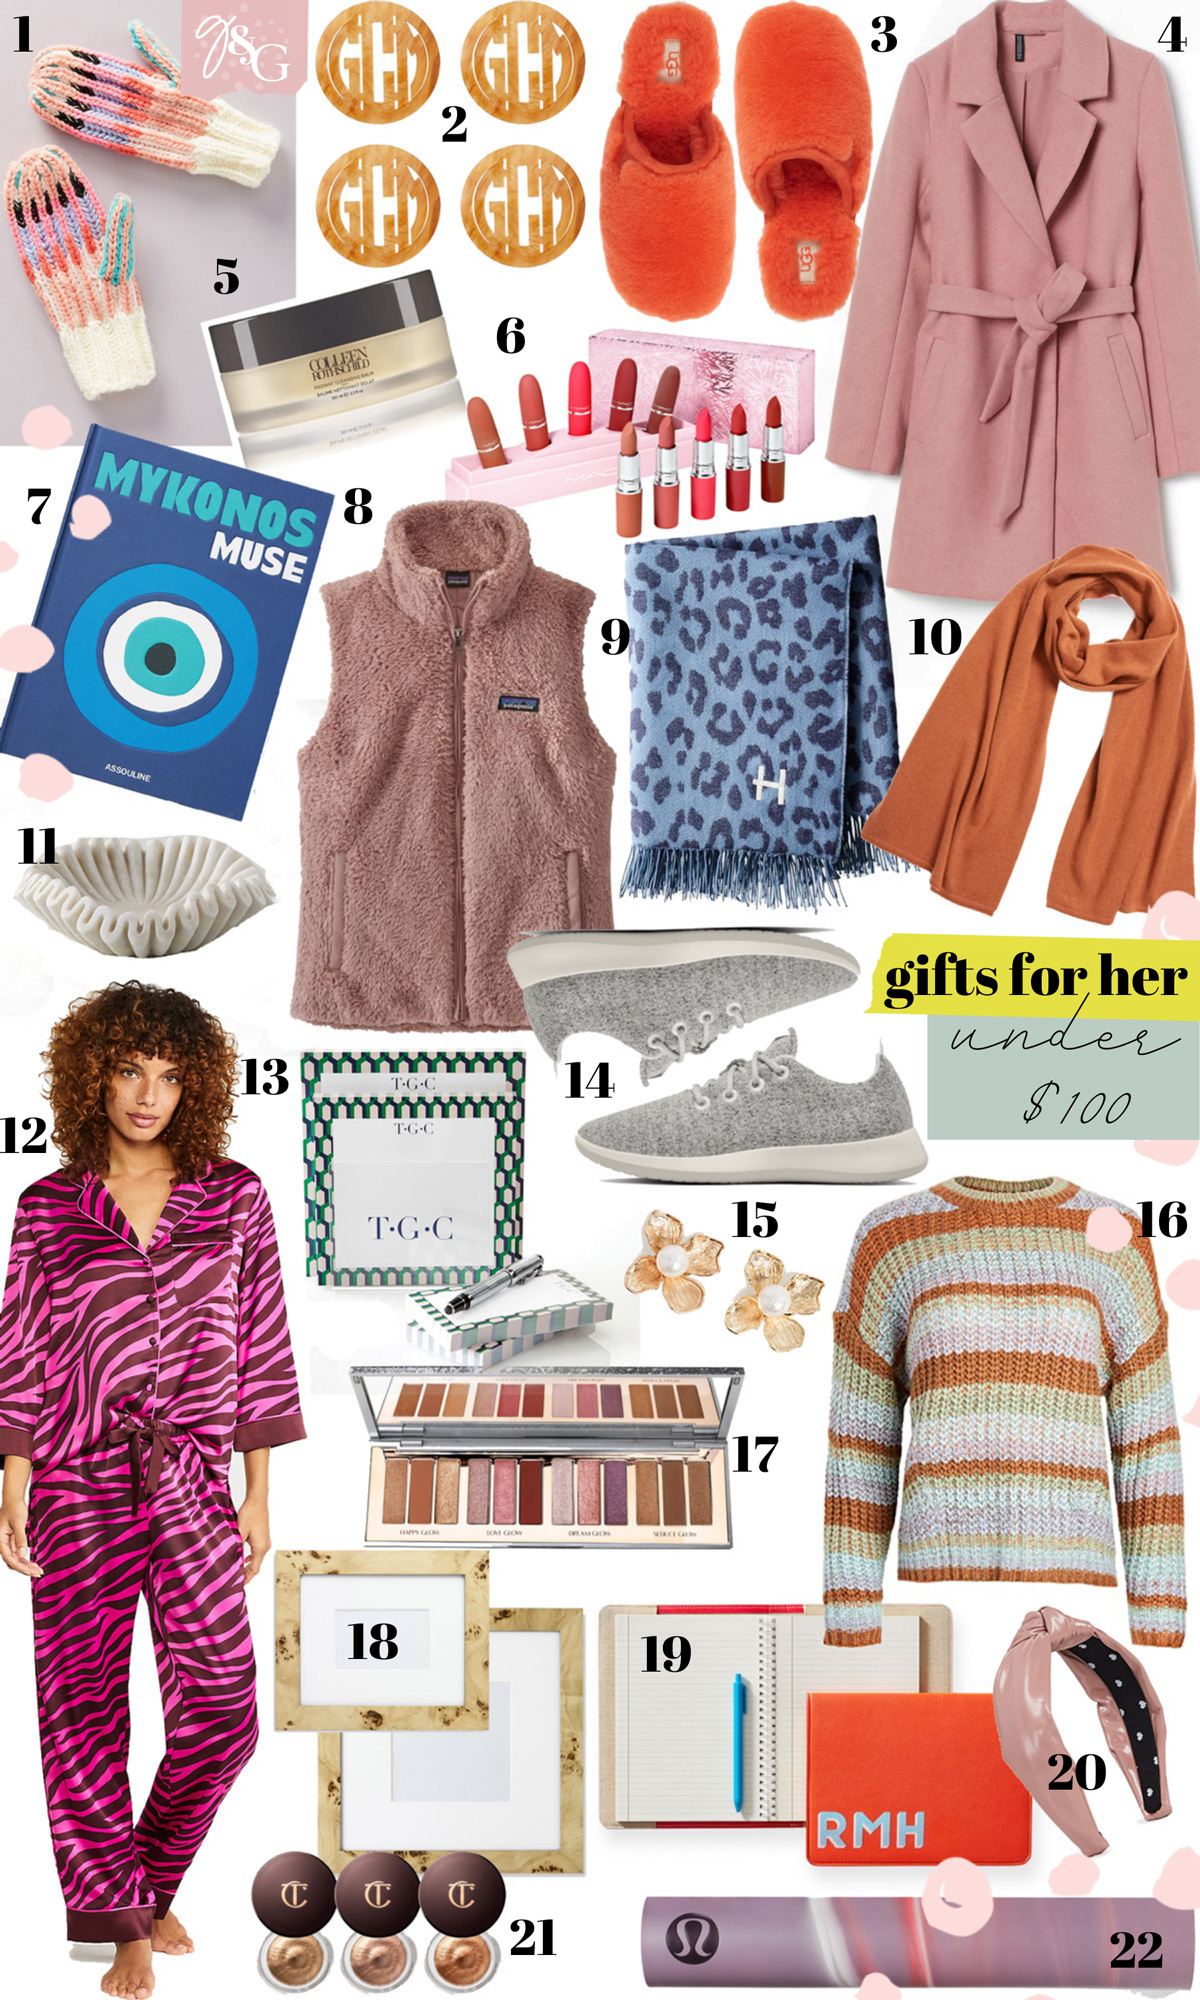 Fun Christmas Gifts for Her Under $100